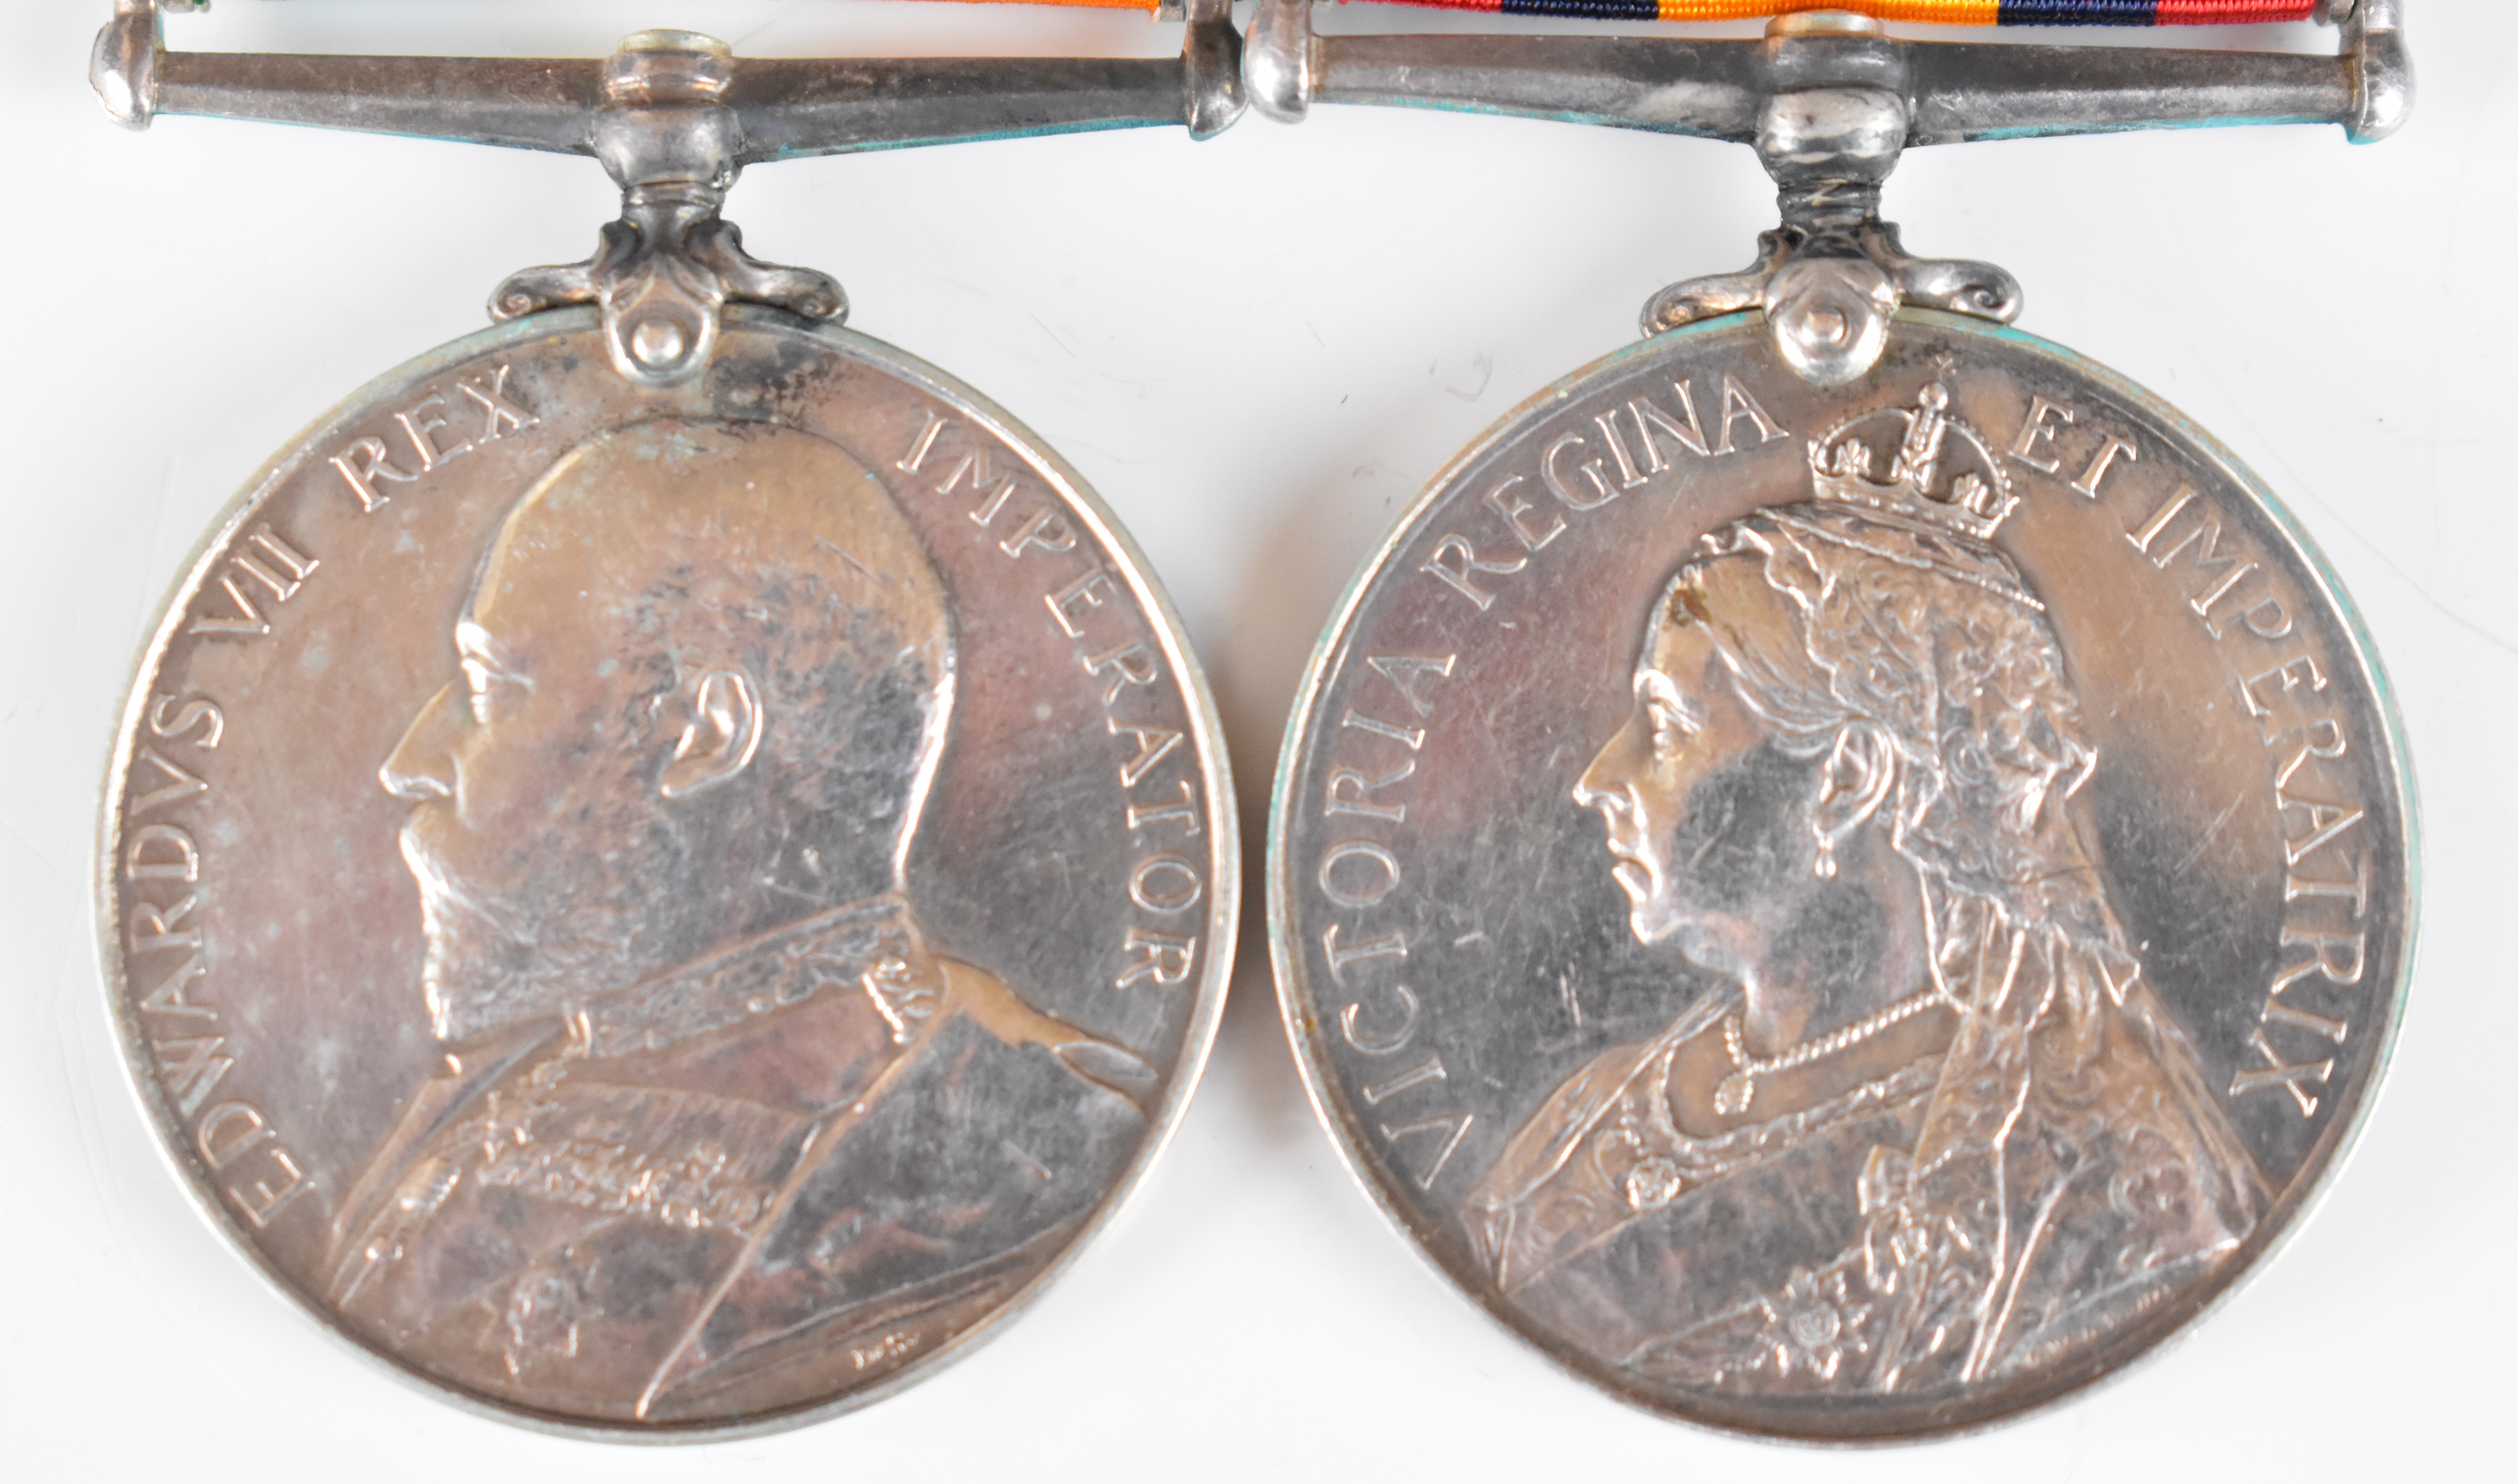 Queen's South Africa Medal with eight clasps for Belmont, Modder River, Relief of Kimberley, - Image 17 of 20